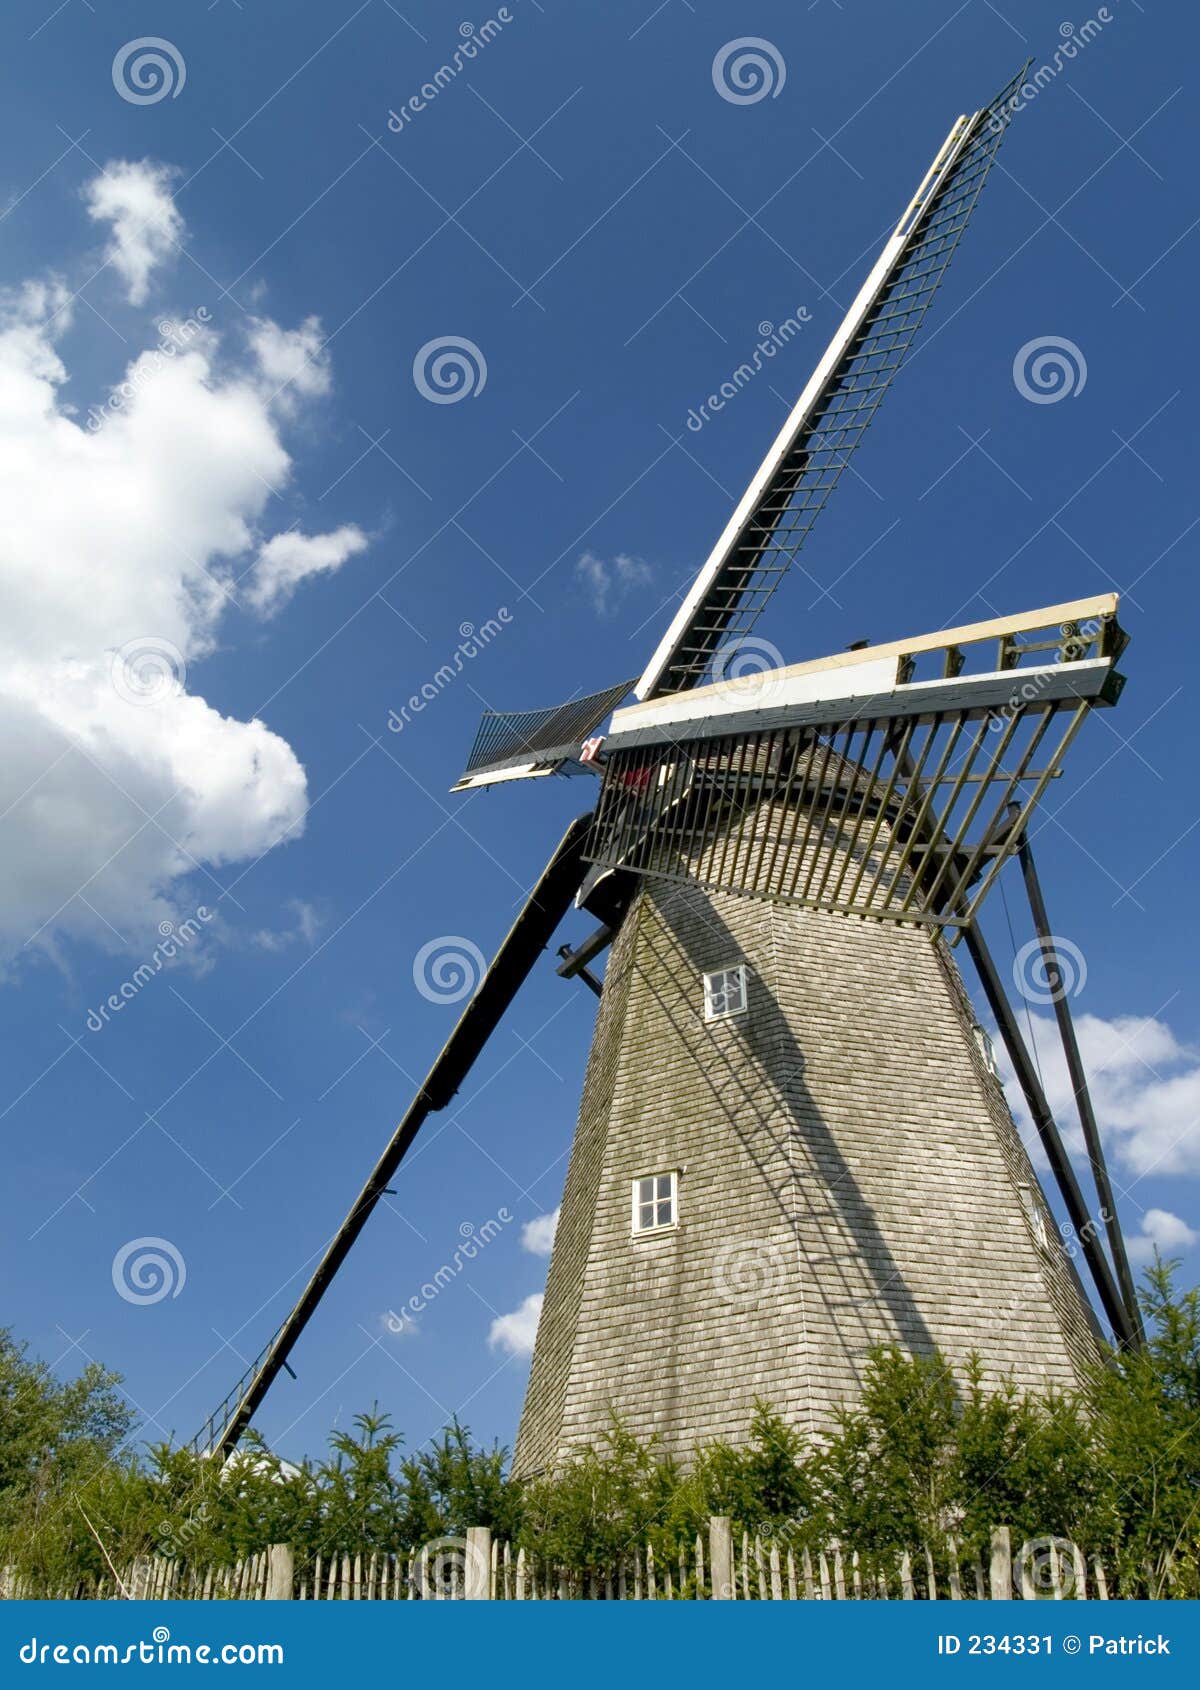 Old windmill against a blue cloudy sky on a sunny day in belgium 